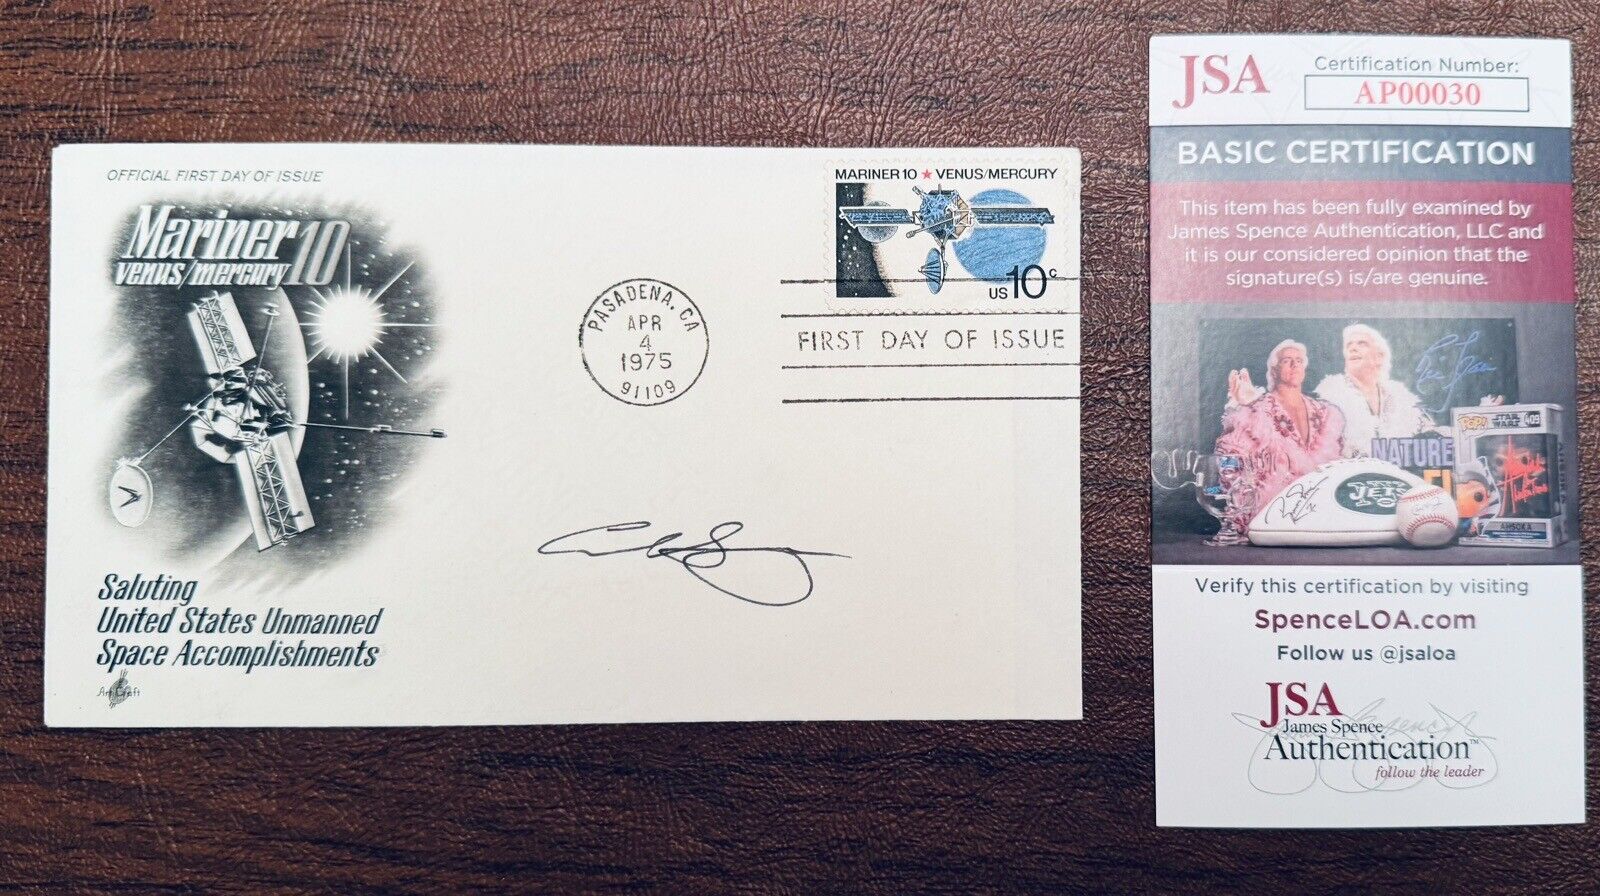 Carl Sagan Signed Autographed First Day Cover JSA Cert Cosmos Astronomer